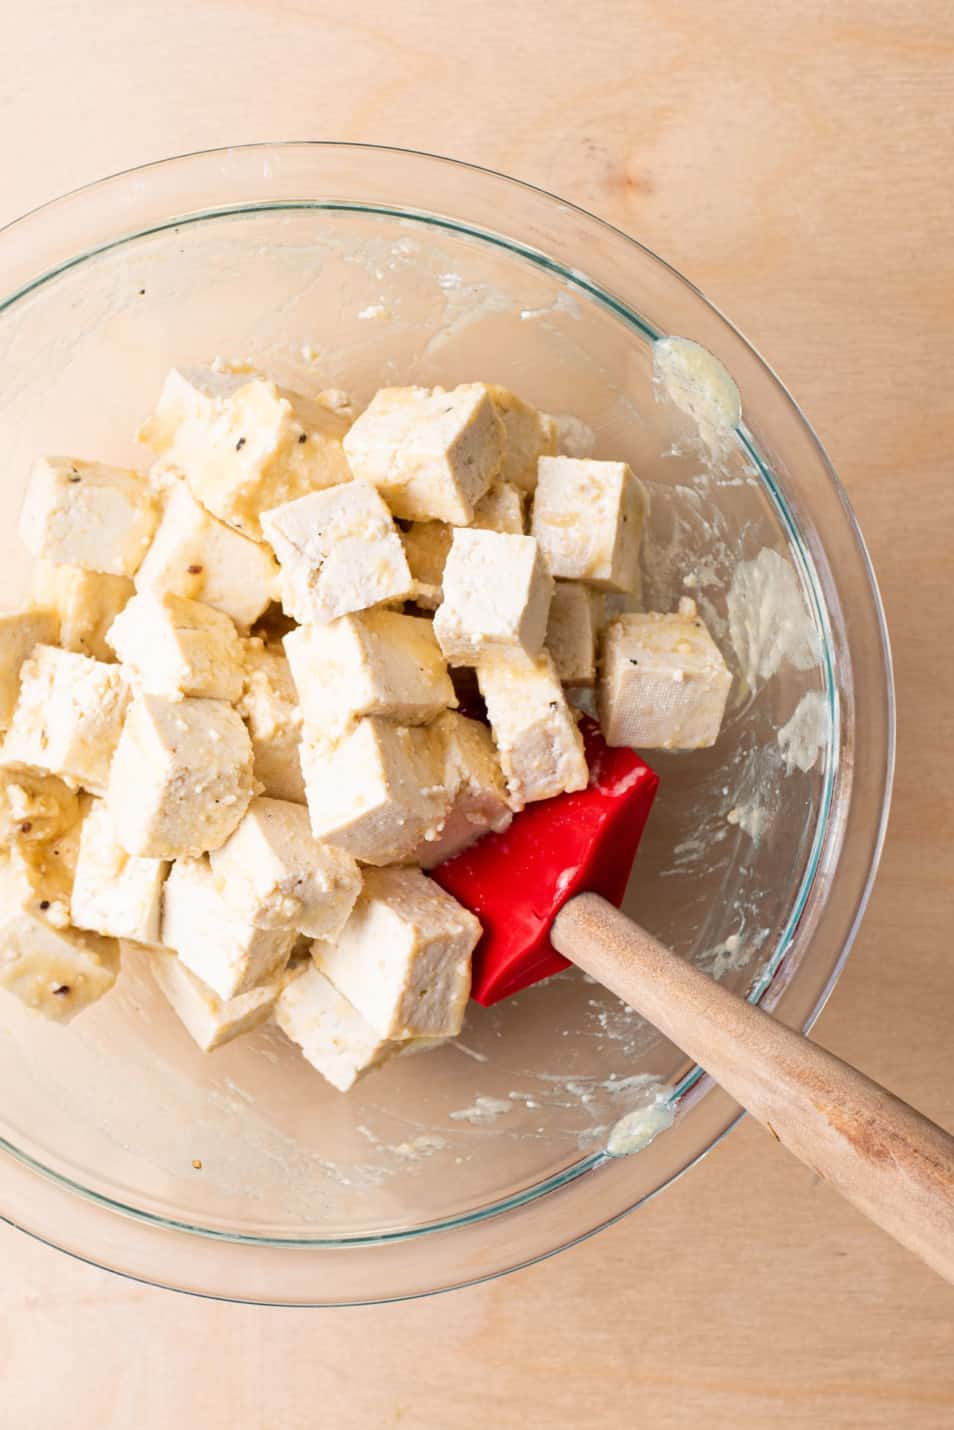 Cubes of tofu marinating with miso and lemon